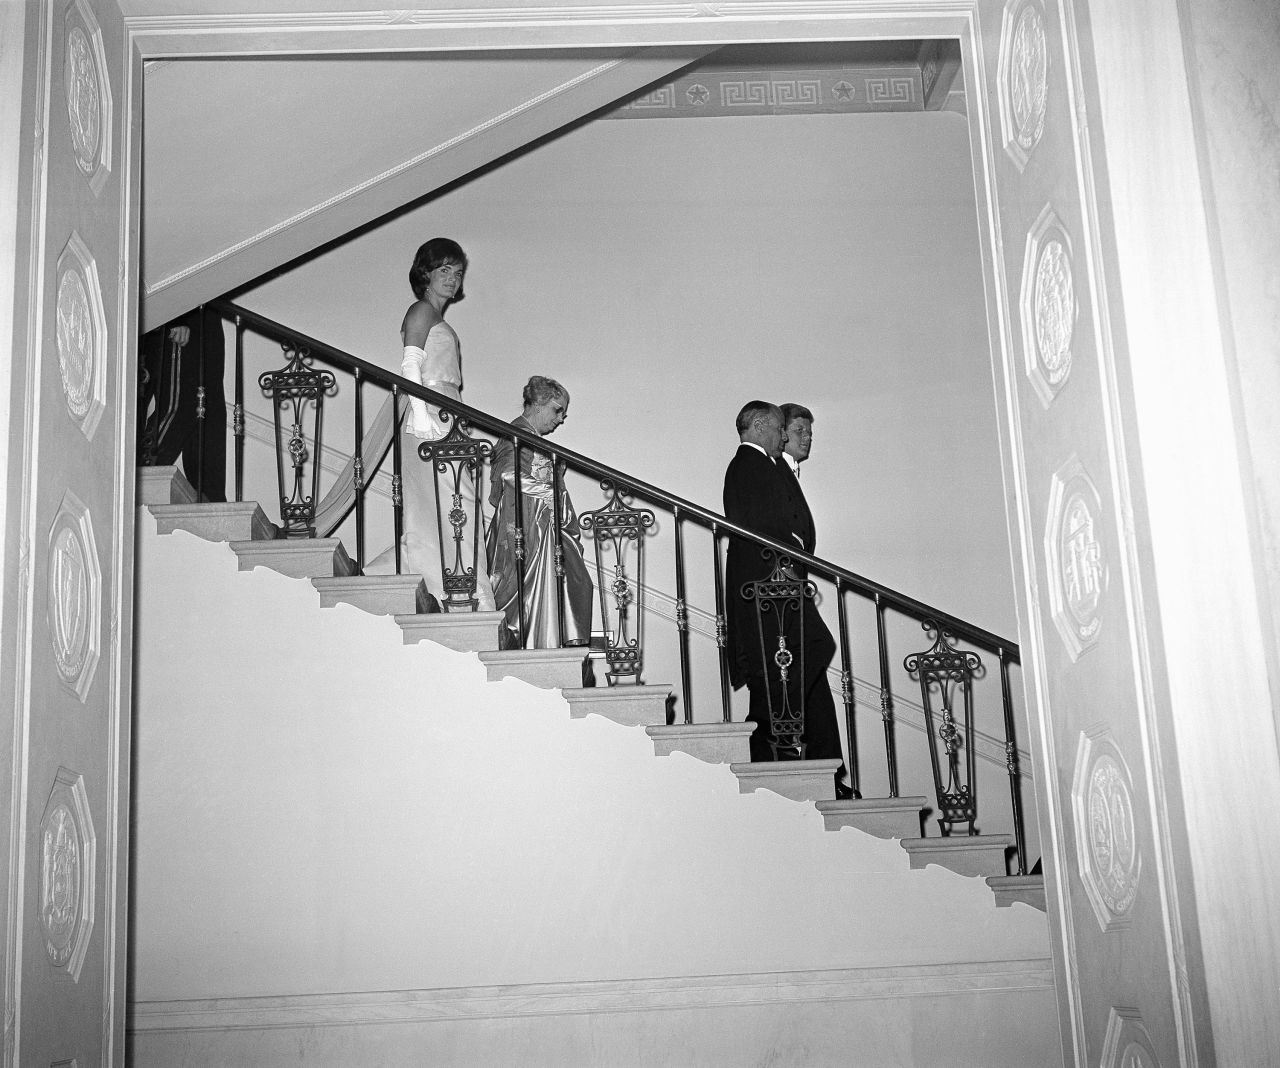 US President John F. Kennedy and Tunisian President Habib Bourguiba are trailed by their wives, Jackie and Moufida, as they walk down White House steps to pose for photos in 1961.